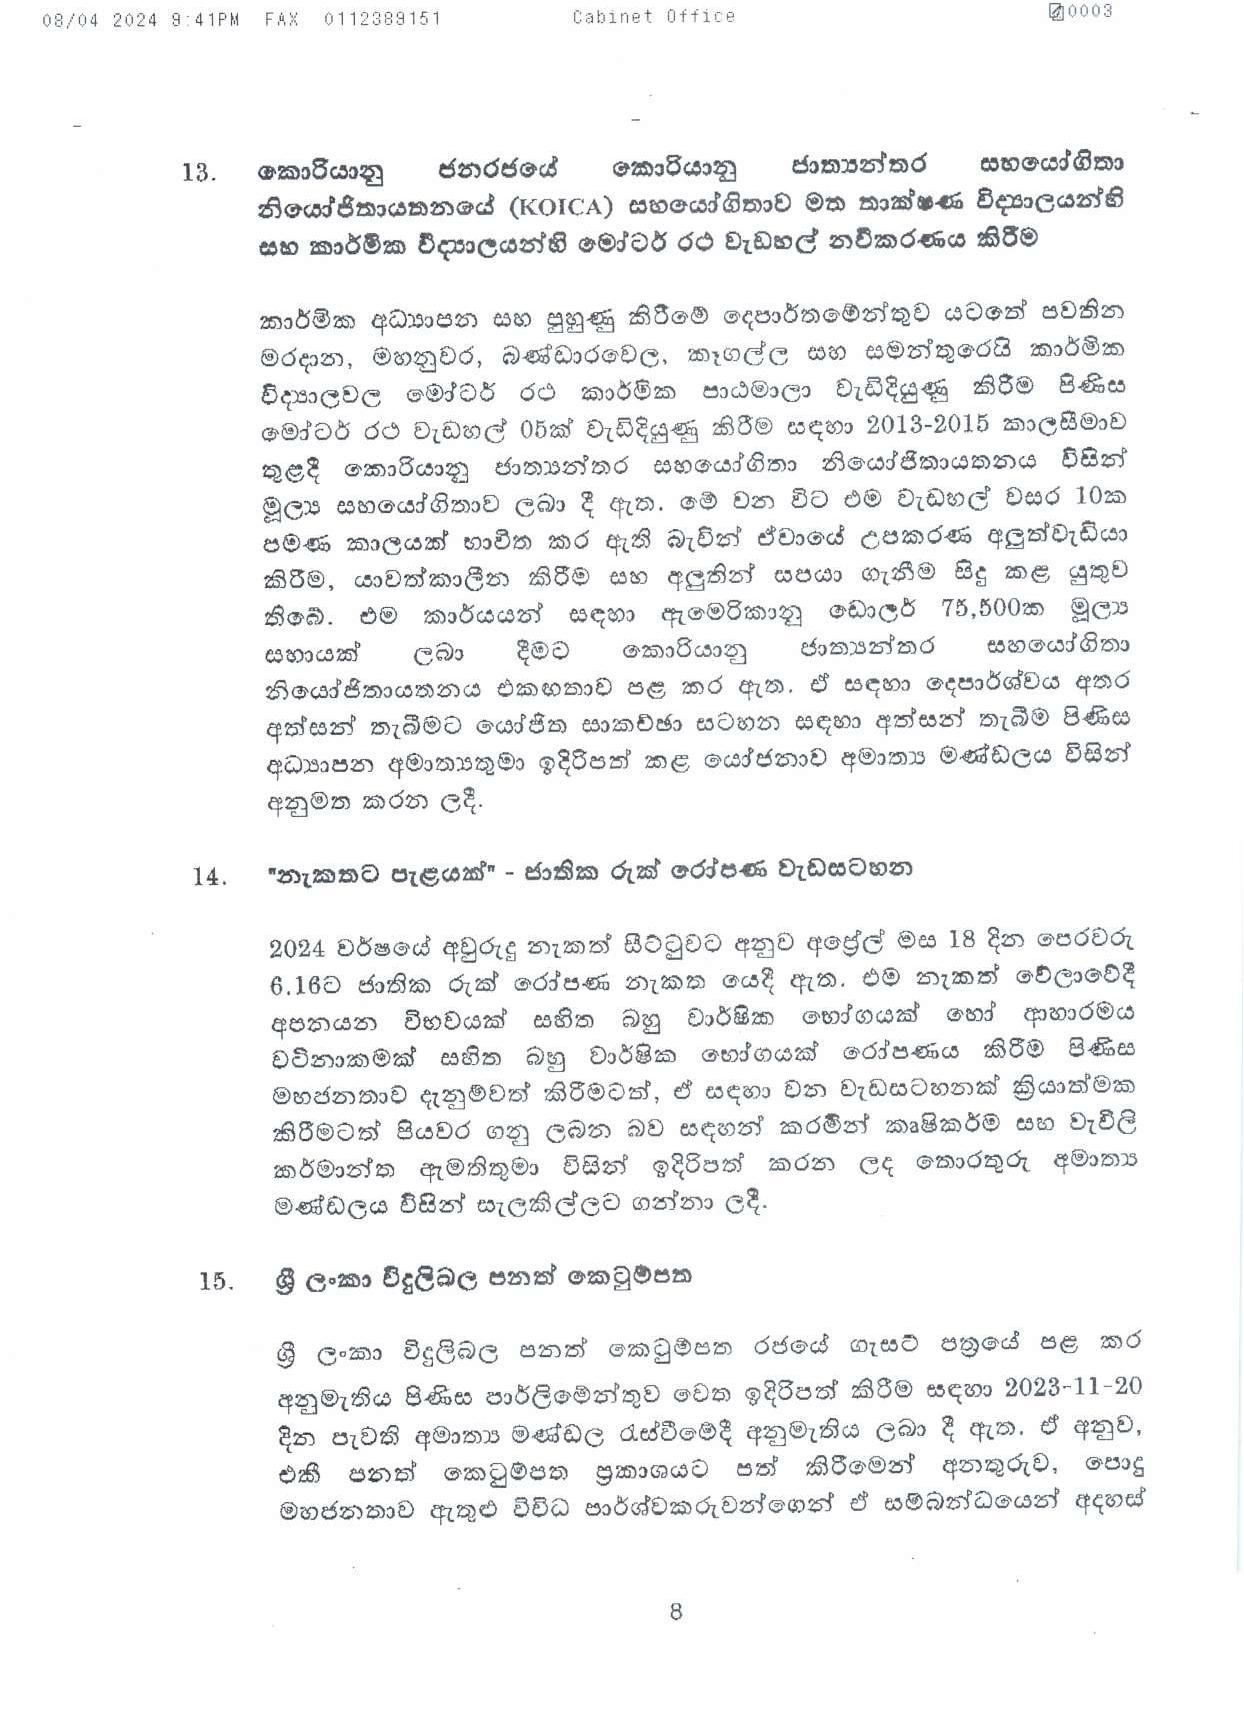 Cabinet Decision on 08.04.2024 page 008